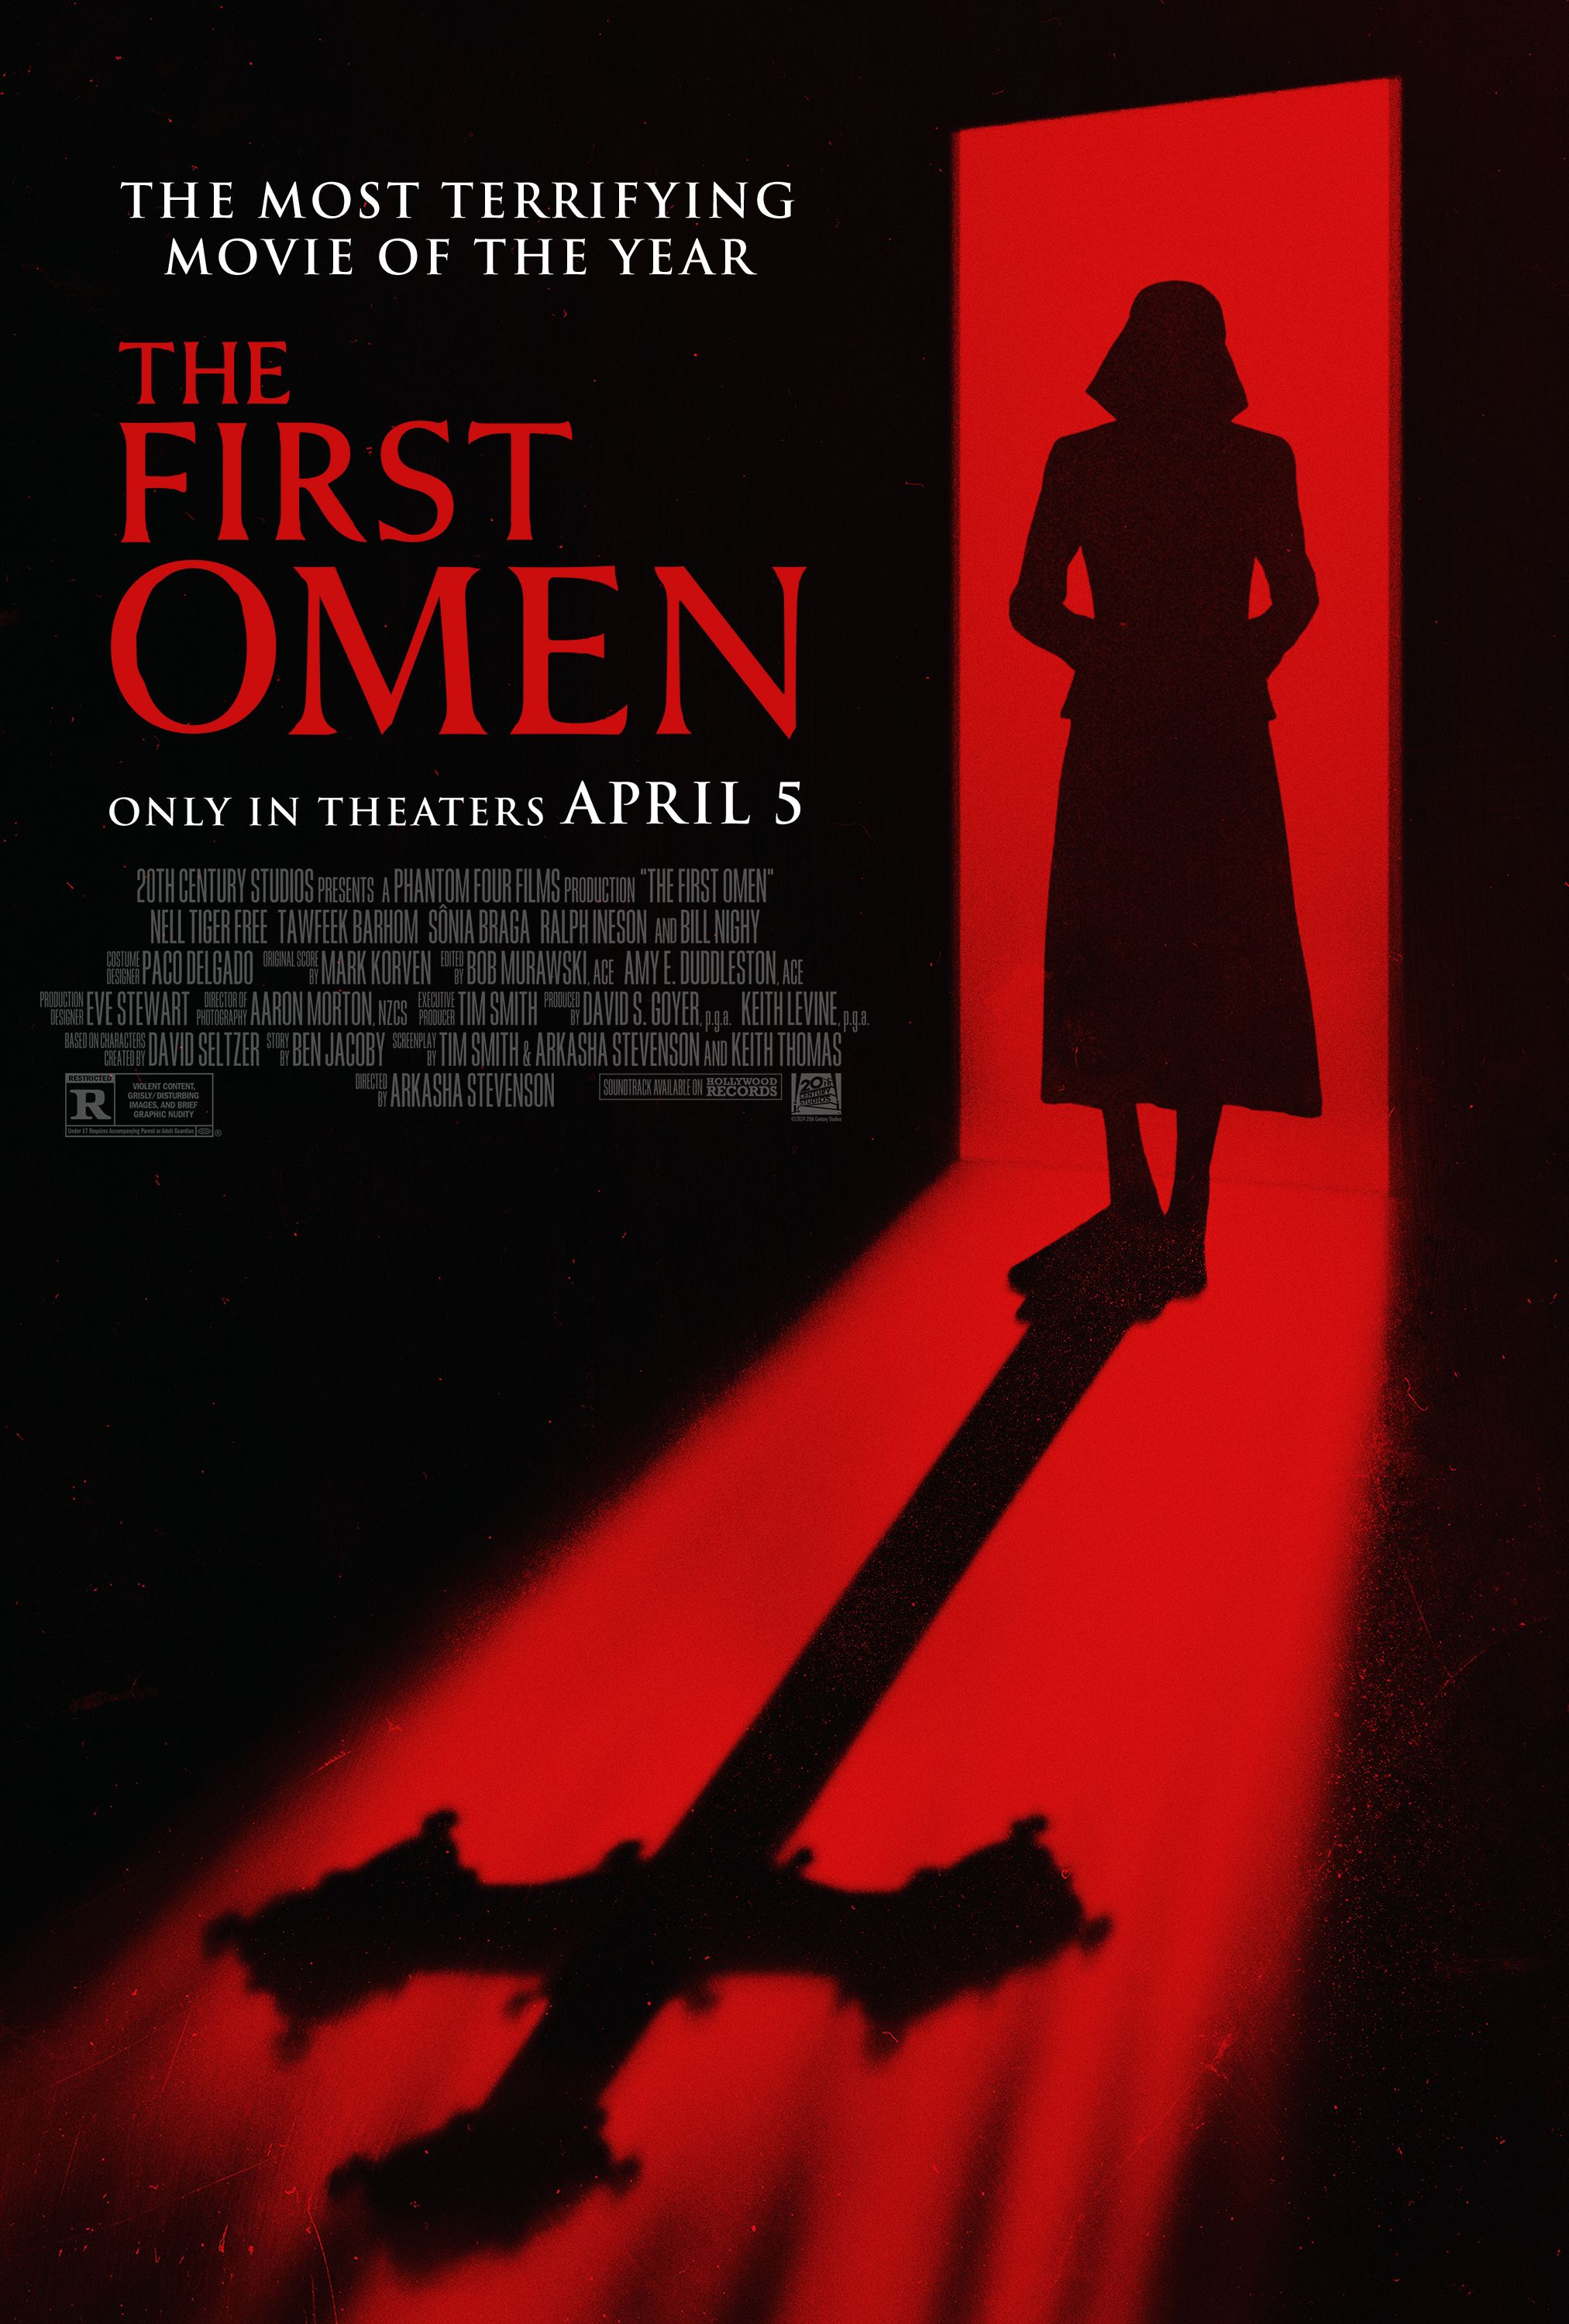 Is The First Omen a Box Office Bomb?